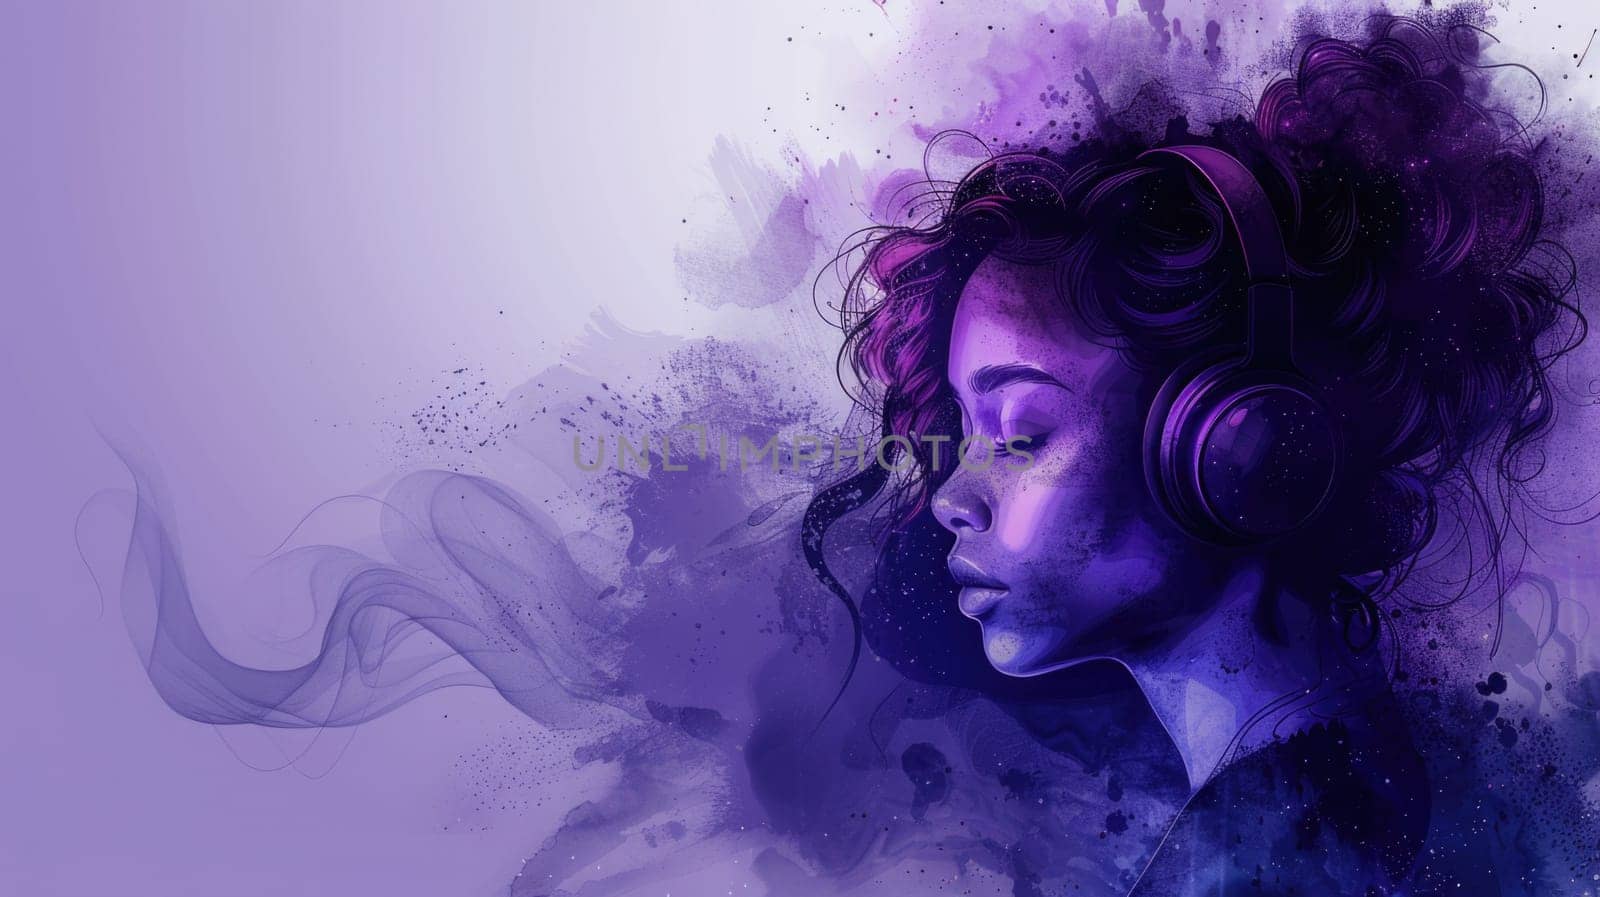 Woman Listening to Music With Headphones Painting by but_photo